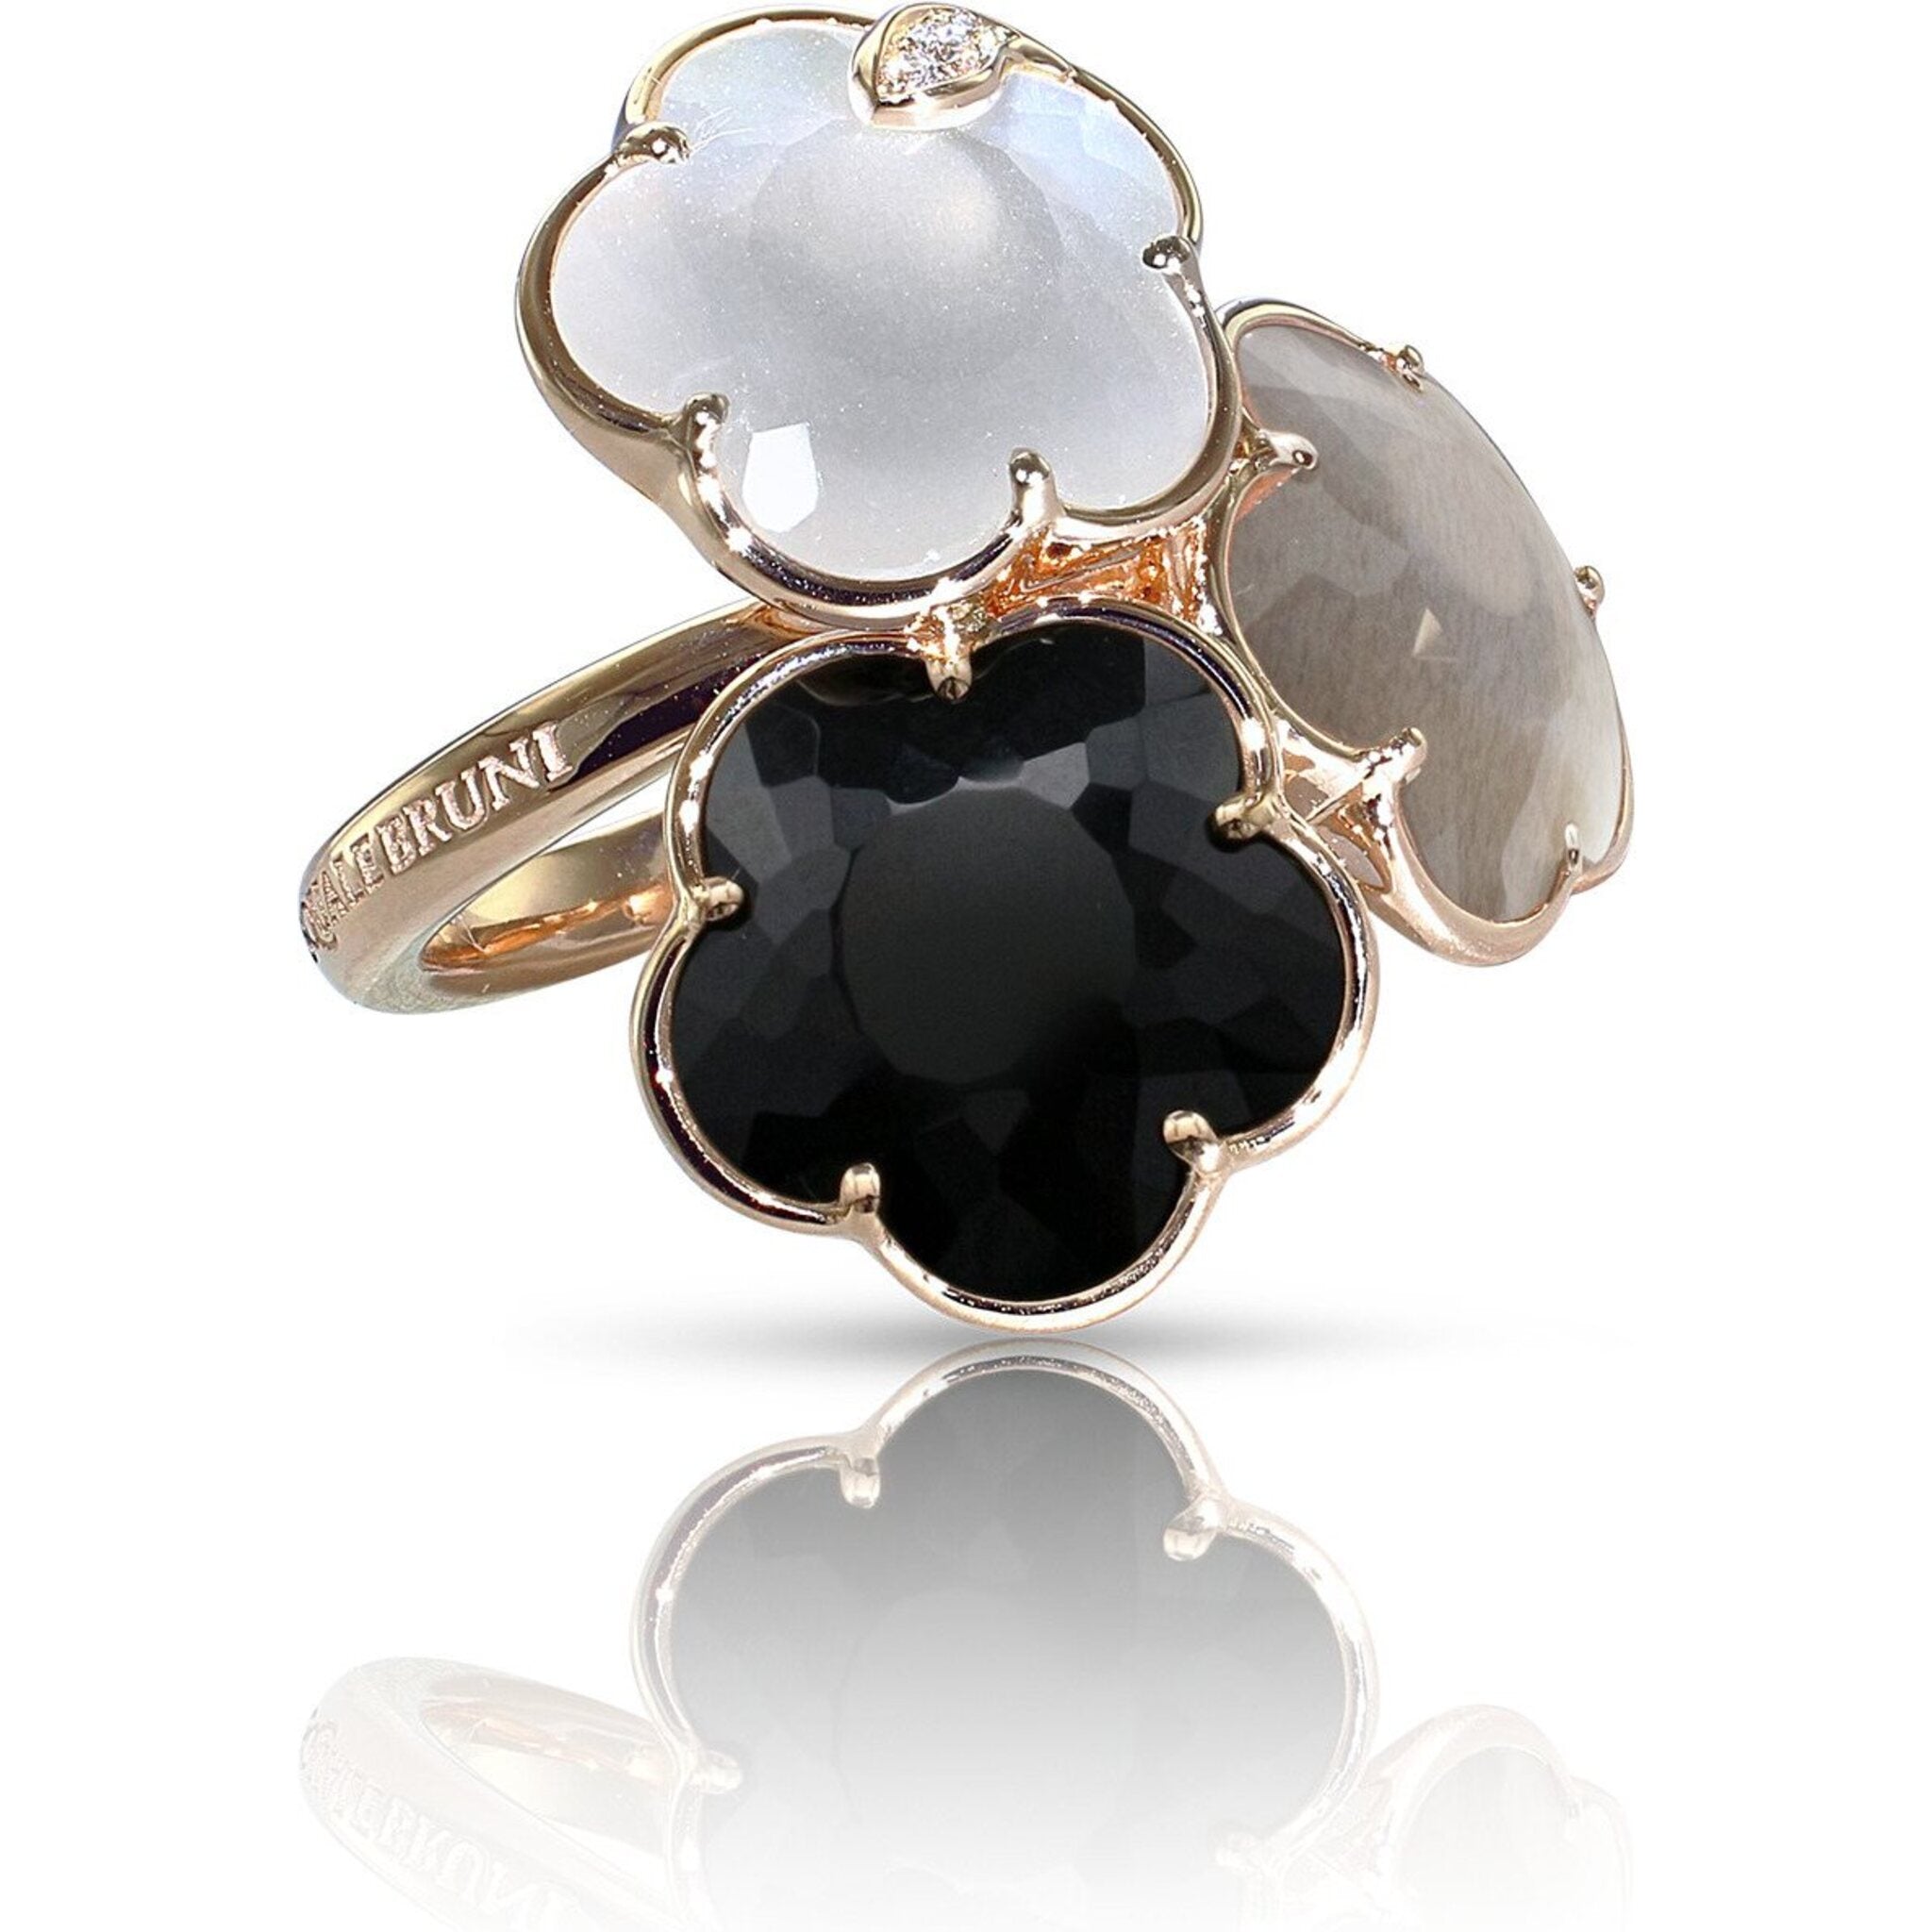 Pasquale Bruni  - Bouquet Lunaire Ring in 18k Rose Gold with Grey and White Moonstone, Onyx and White Diamonds